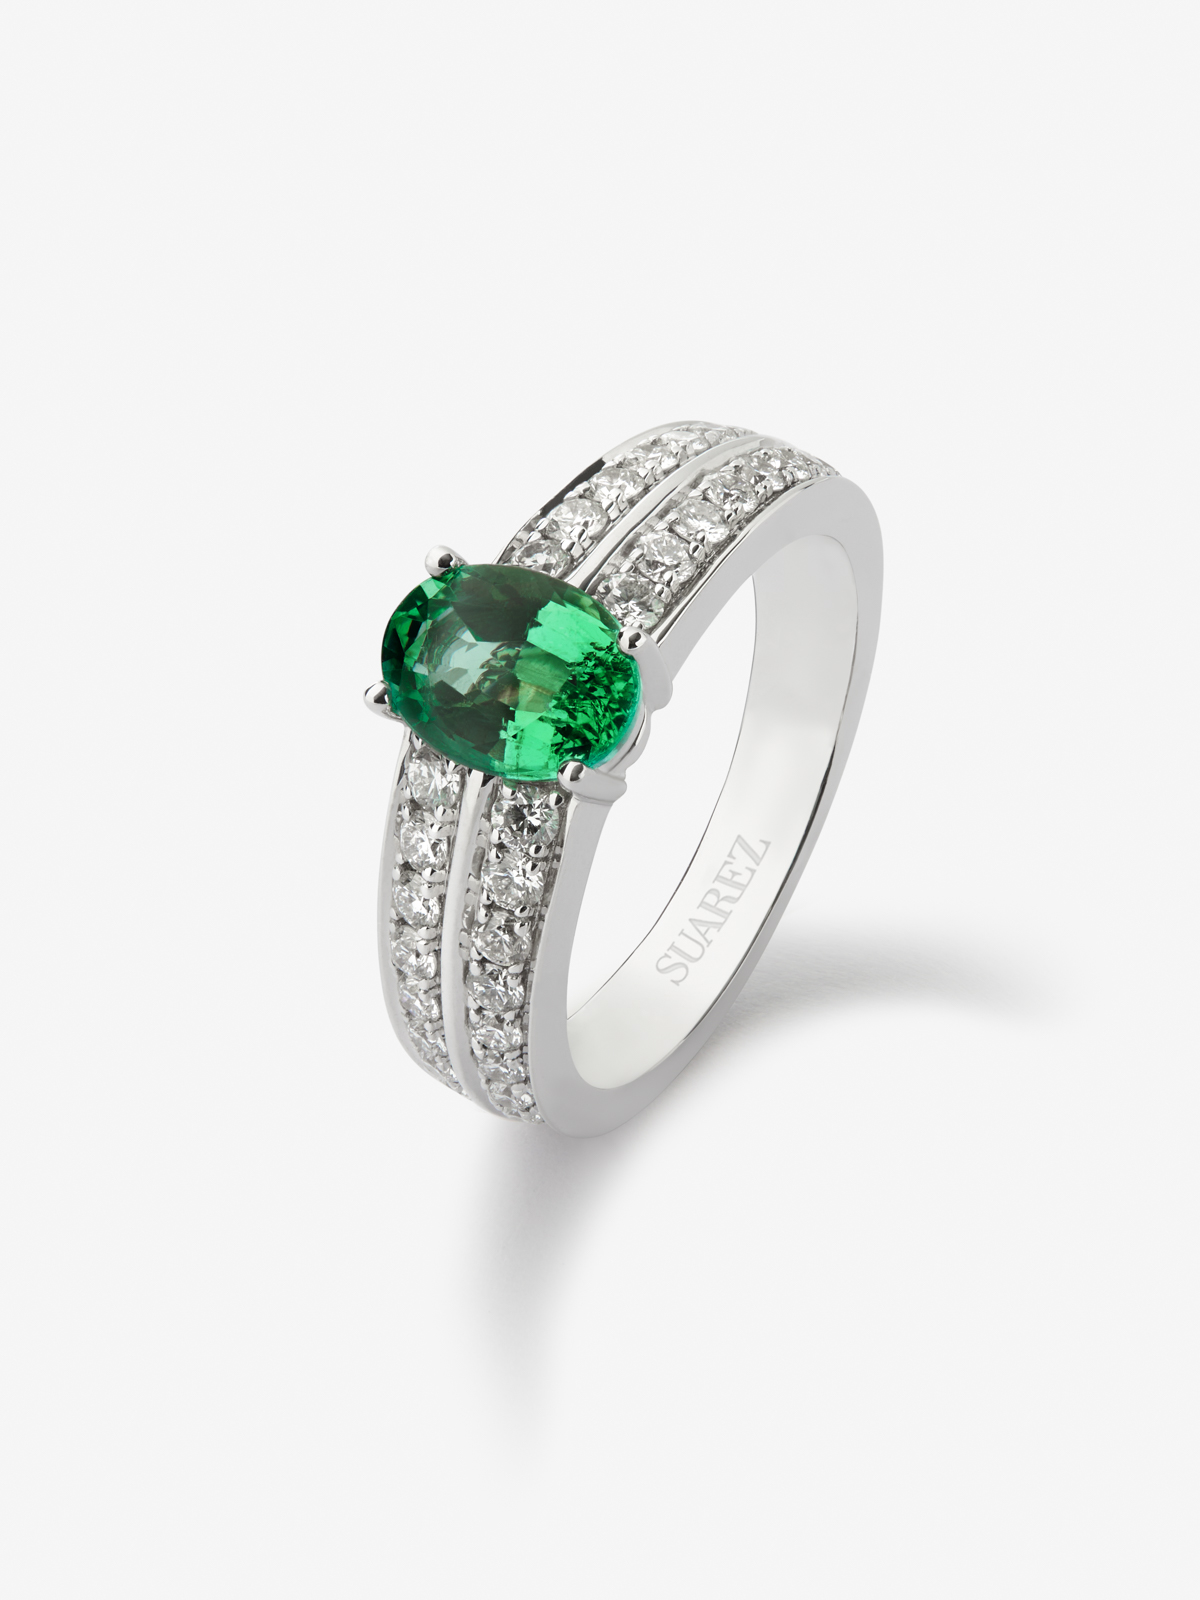 18K white gold ring with oval-cut emerald of 0.74 cts and 40 brilliant-cut diamonds with a total of 0.19 cts